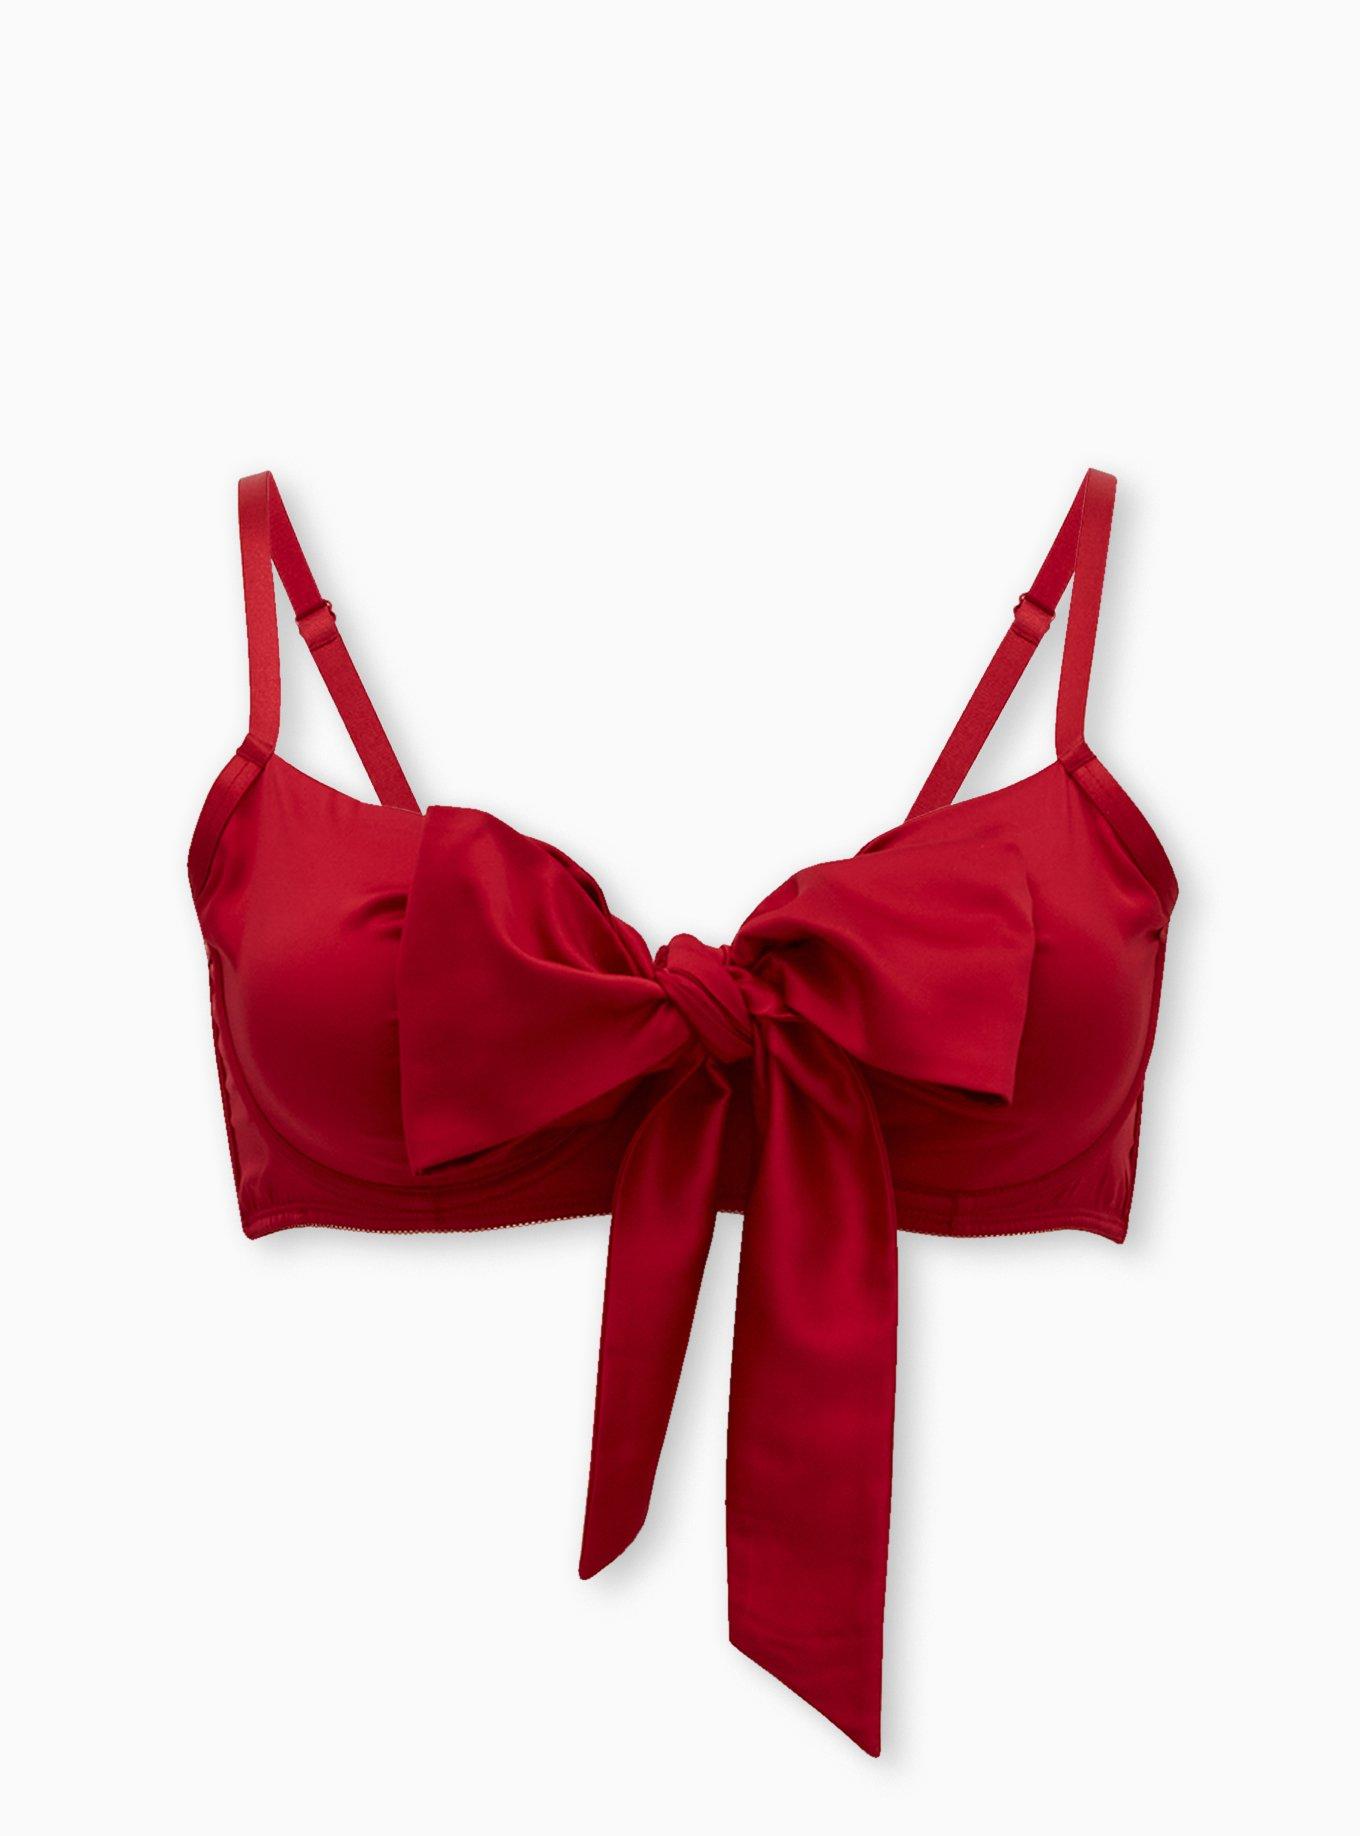 Plus Size - Unlined Underwire Longline Bra - Satin & Lace Bow Red